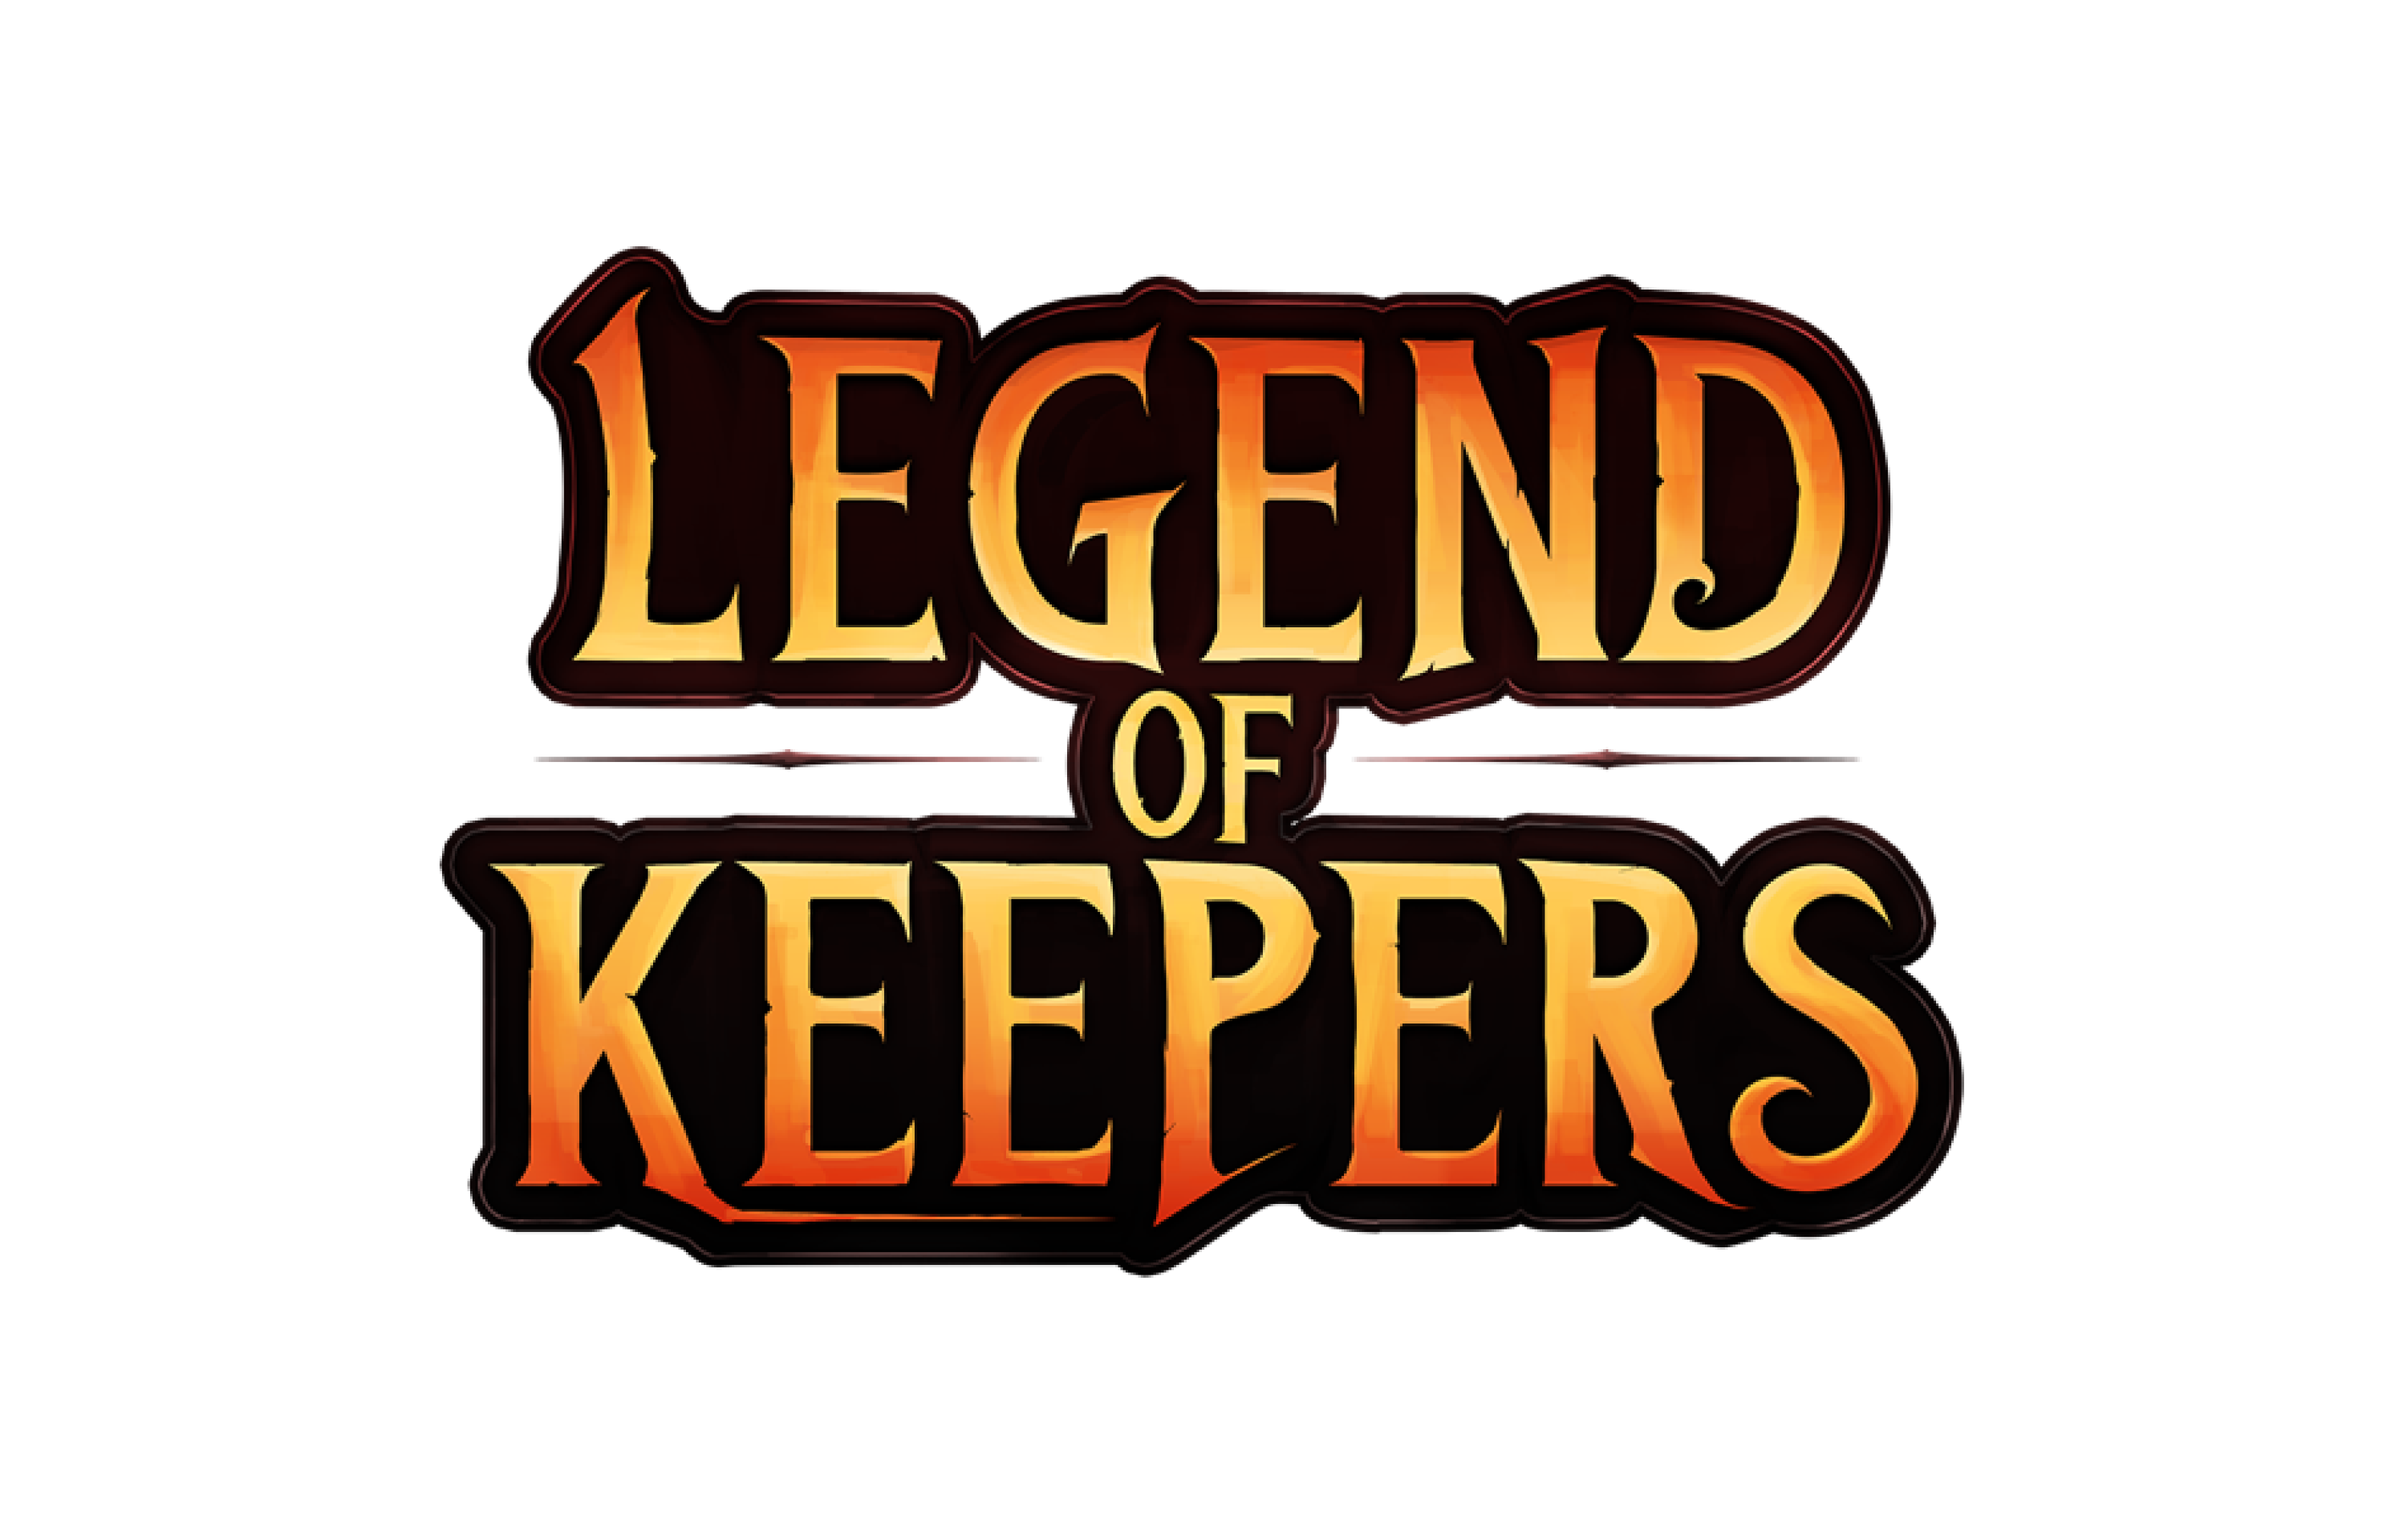 Legend of keepers logo